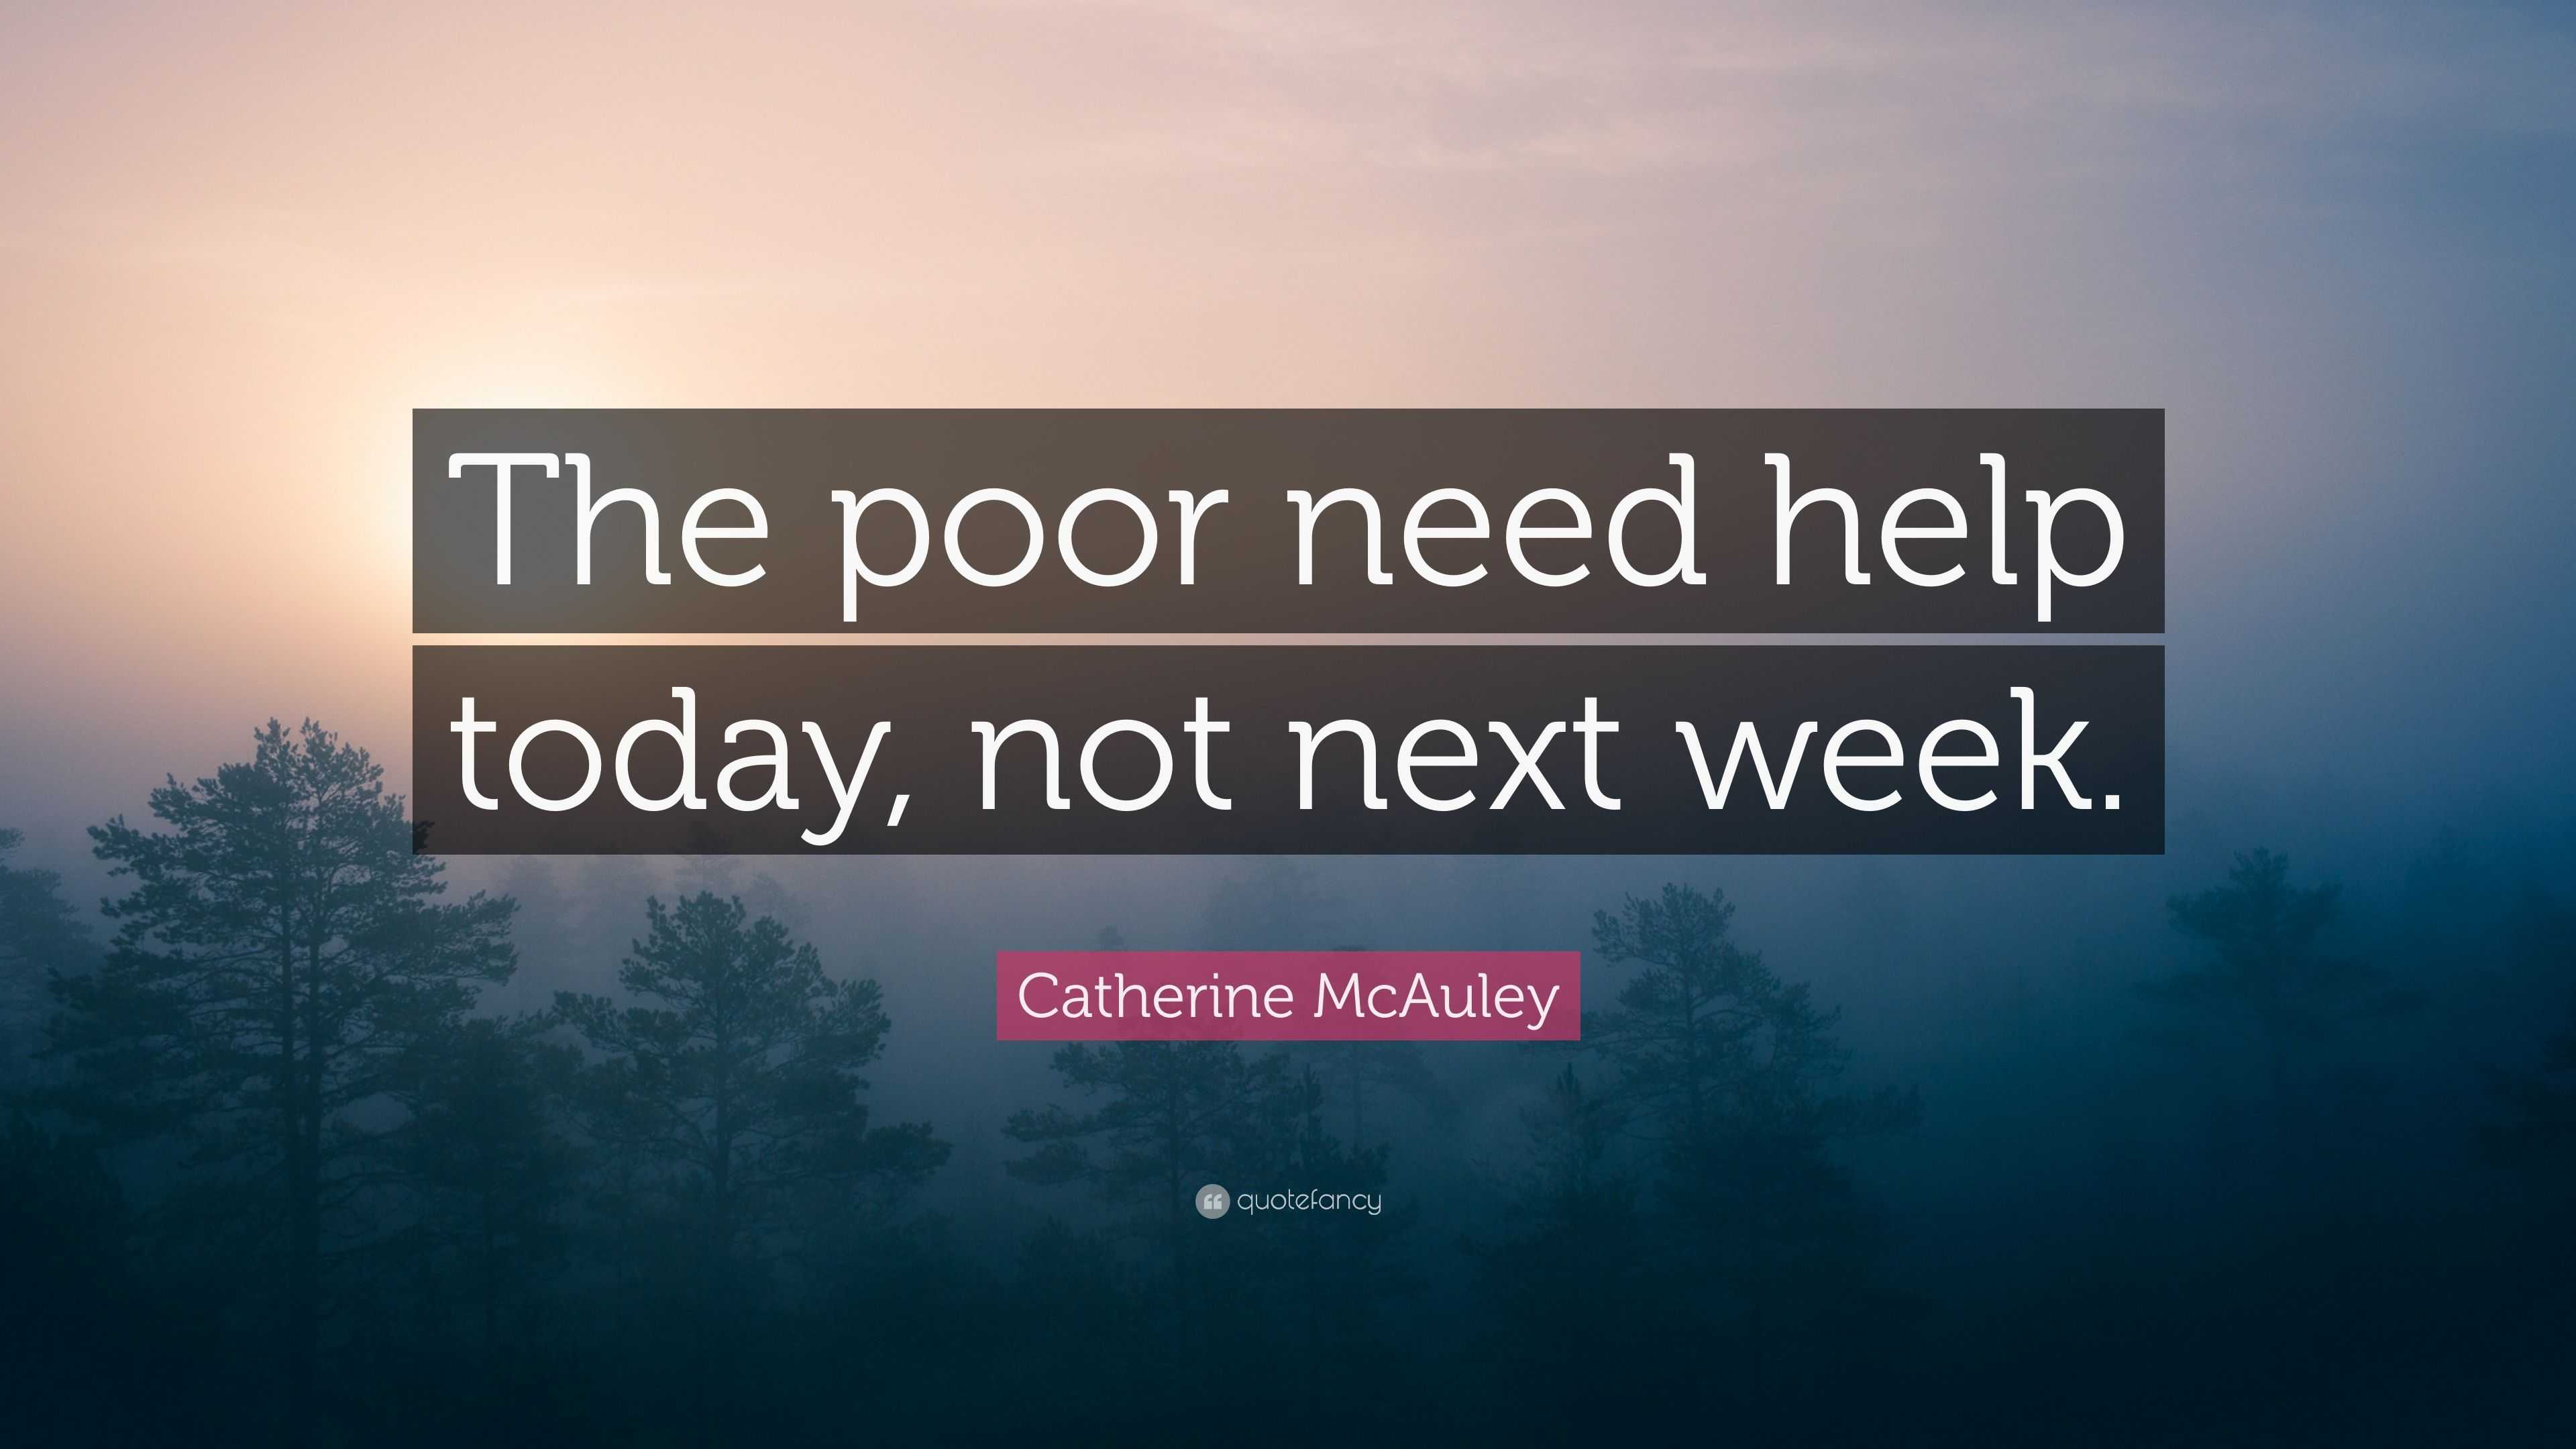 Catherine McAuley Quote: “The poor need help today, not next week ...